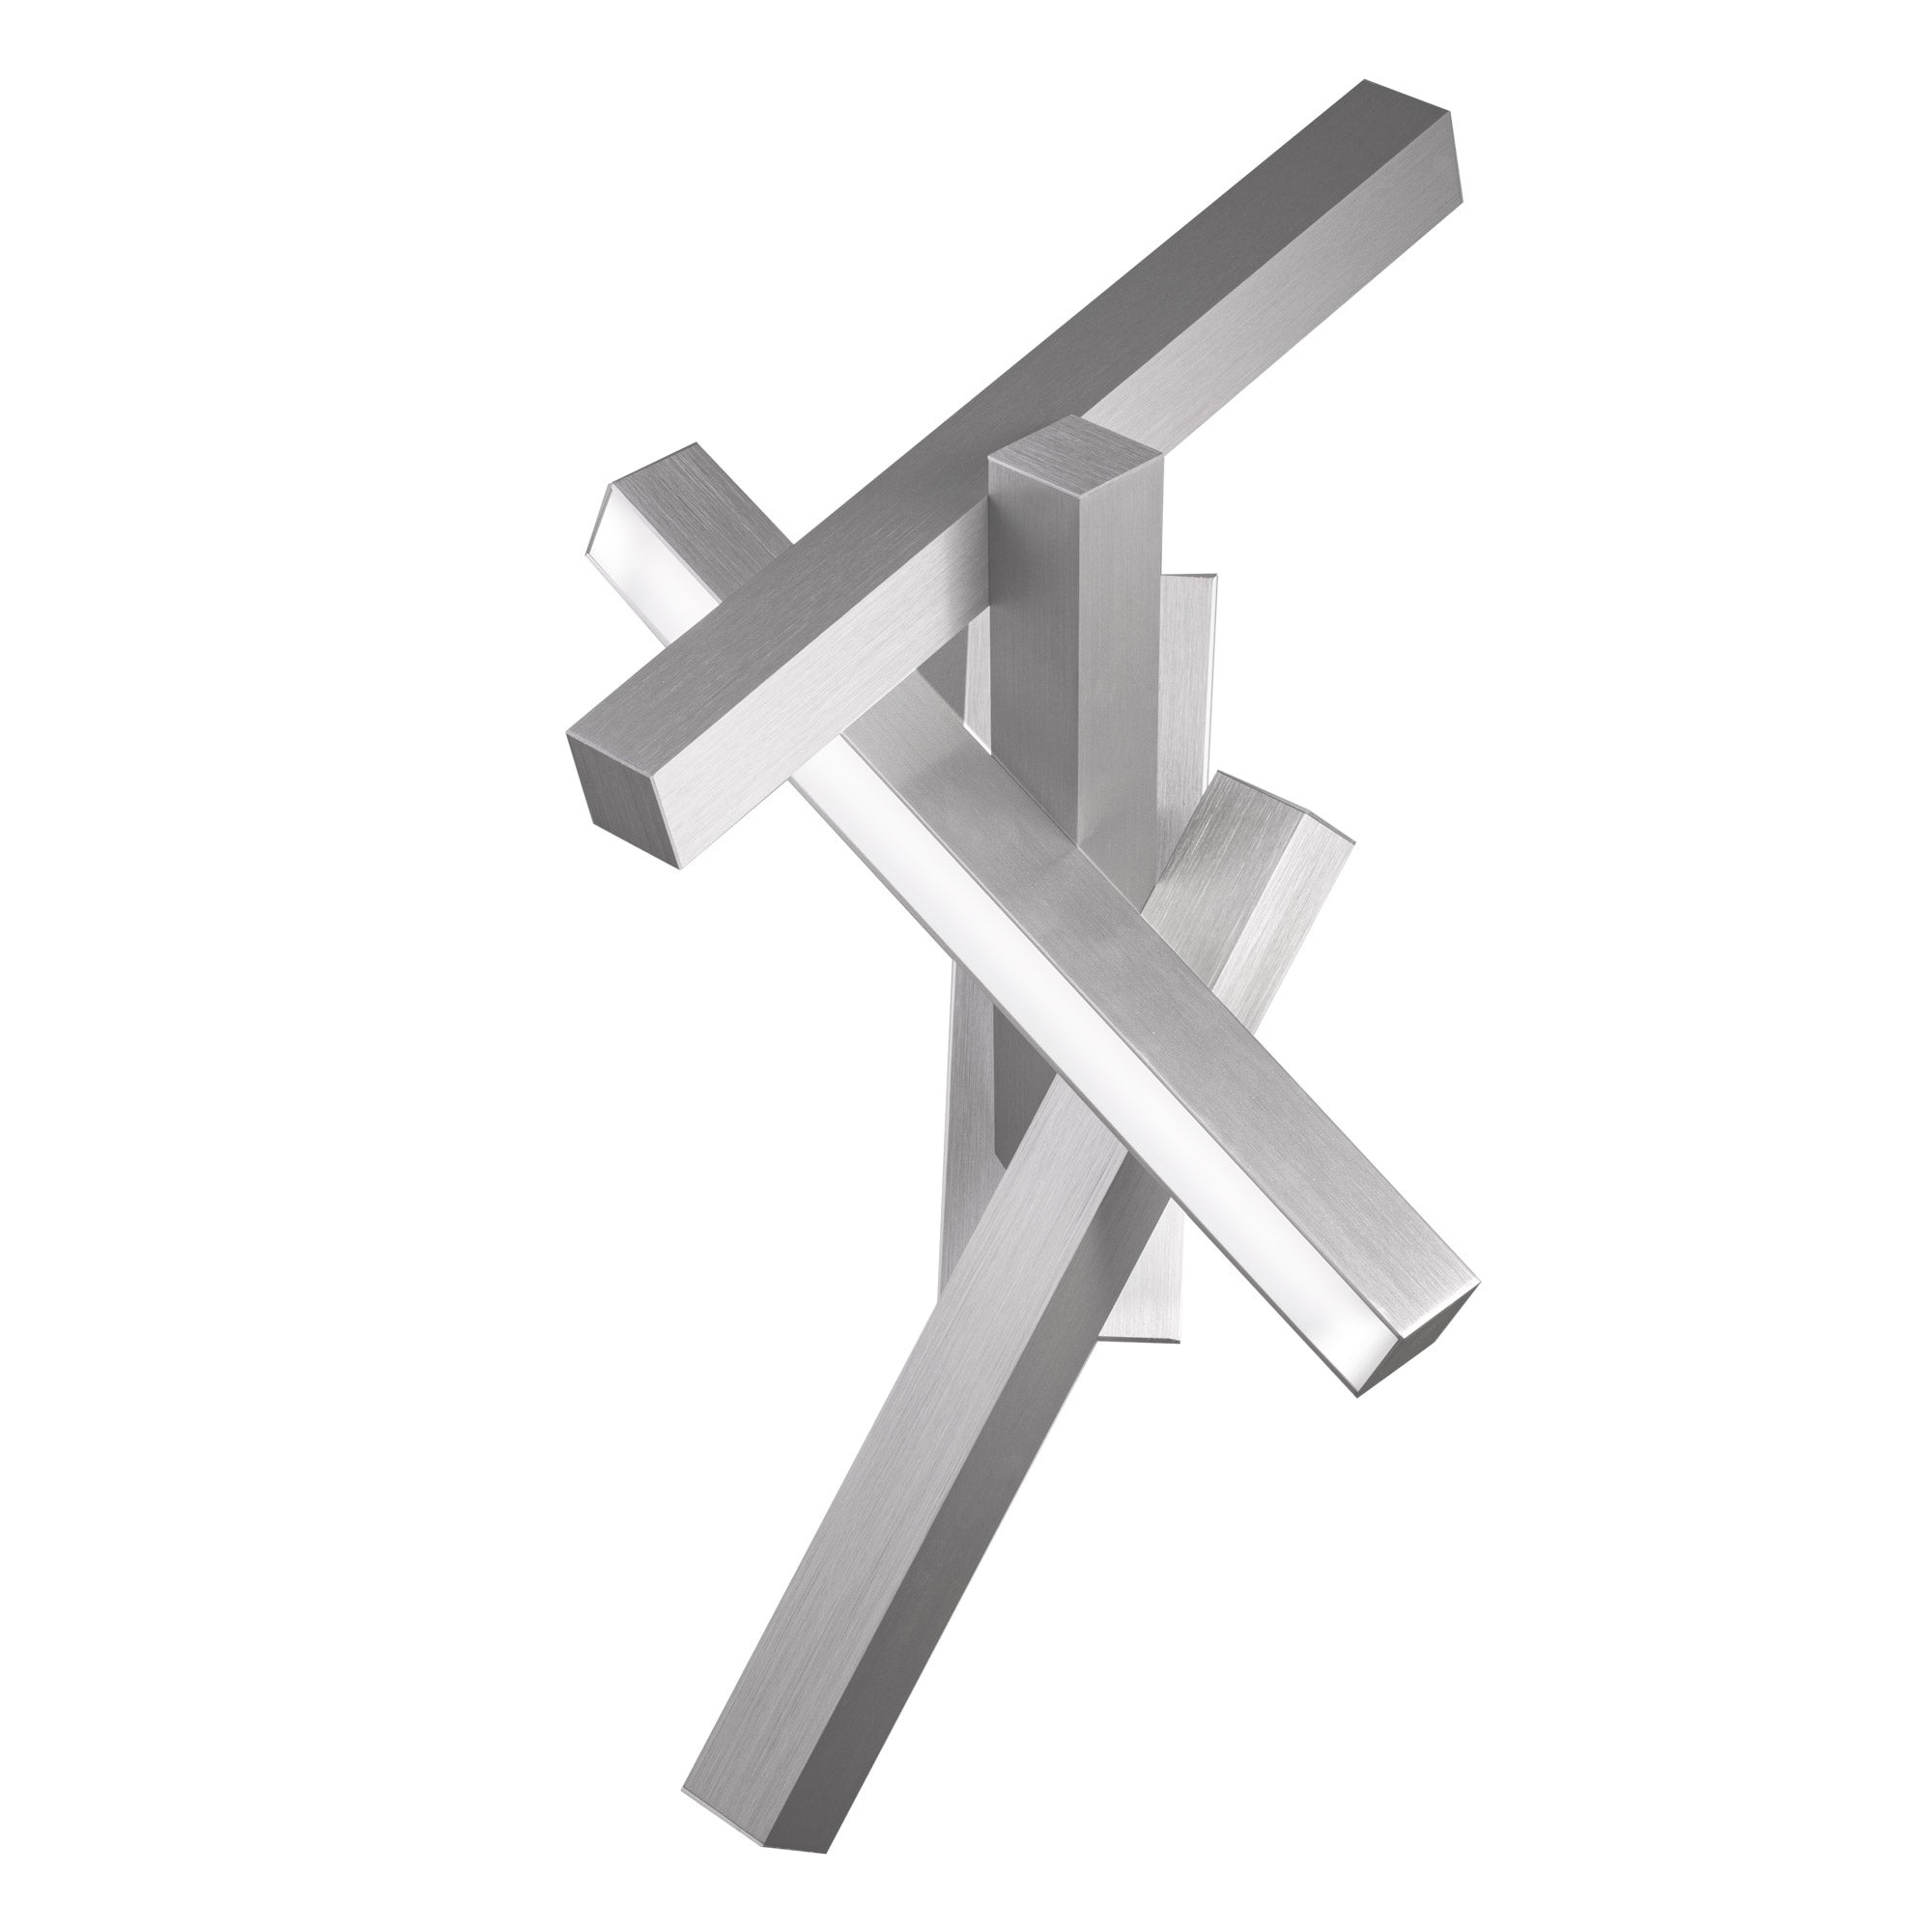 CHAOS Sconce Aluminum INTEGRATED LED - WS-64832-AL | MODERN FORMS